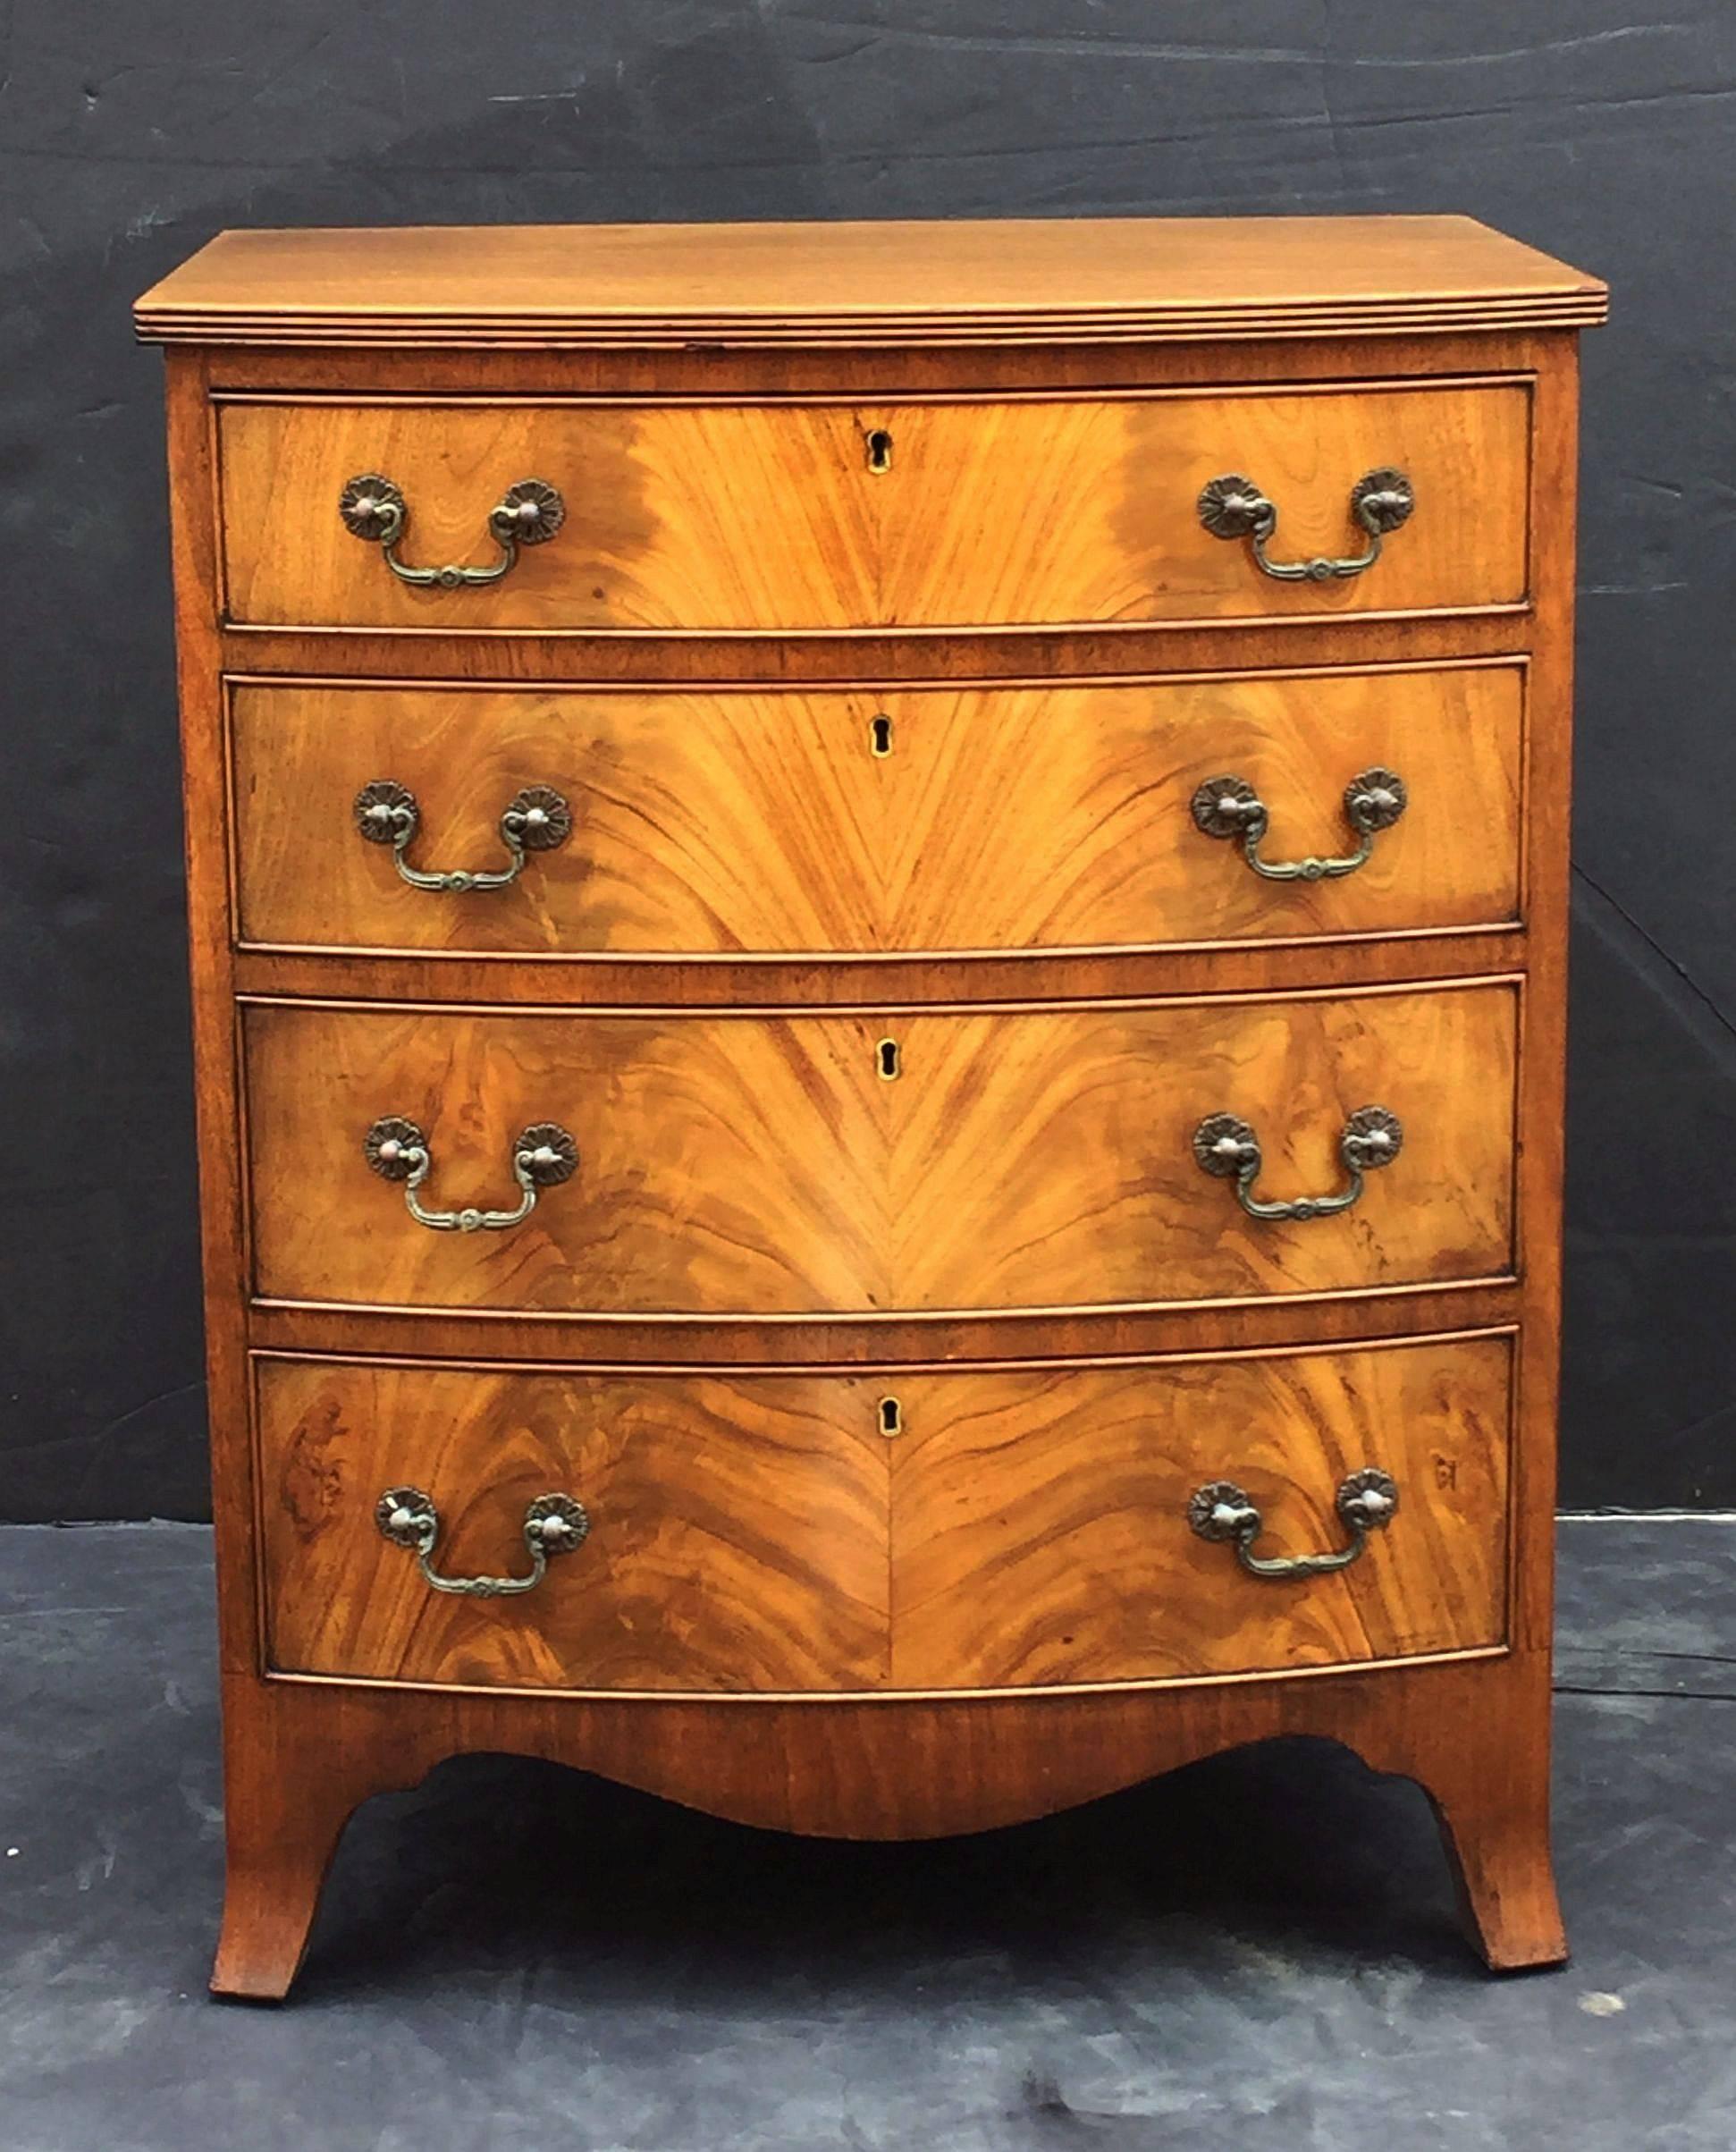 A fine English small bow front chest of mahogany, featuring a moulded top over a frieze of four bowed and beaded drawers, each drawer with handsome flame-cut mahogany veneers and brass pulls and escutcheons. 
Set upon a serpentine apron base with